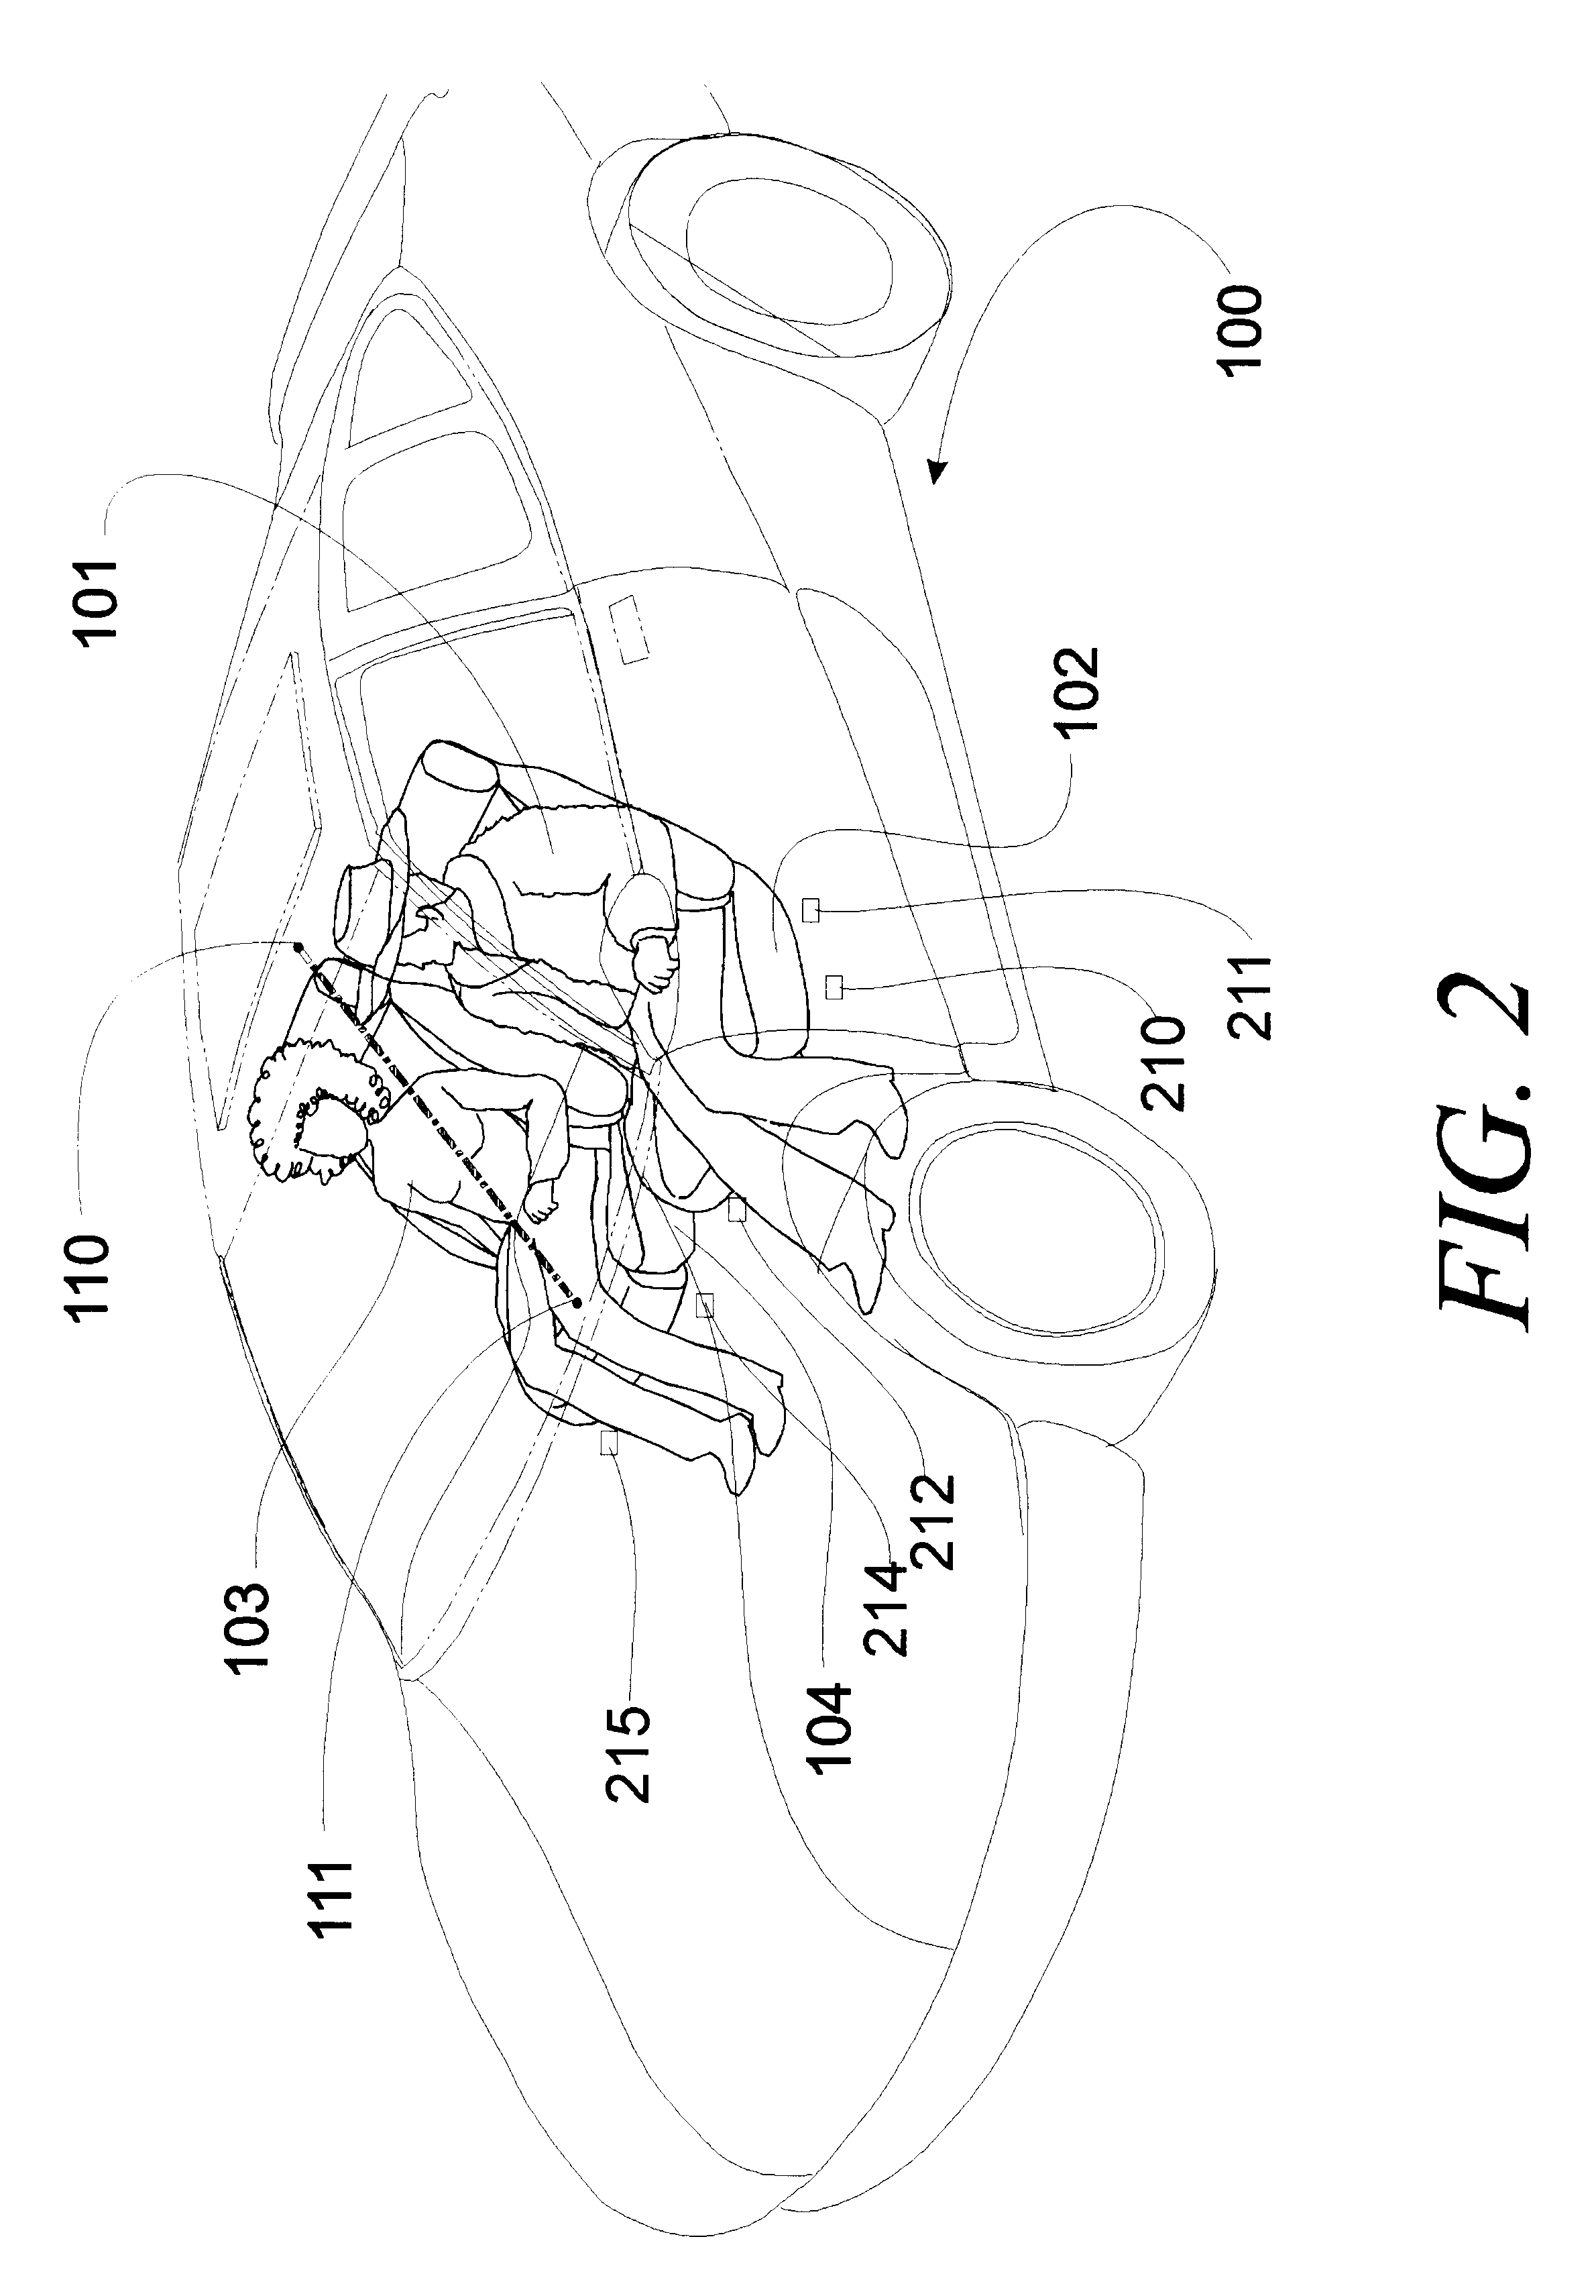 System for determining the occupancy state of a seat in a vehicle